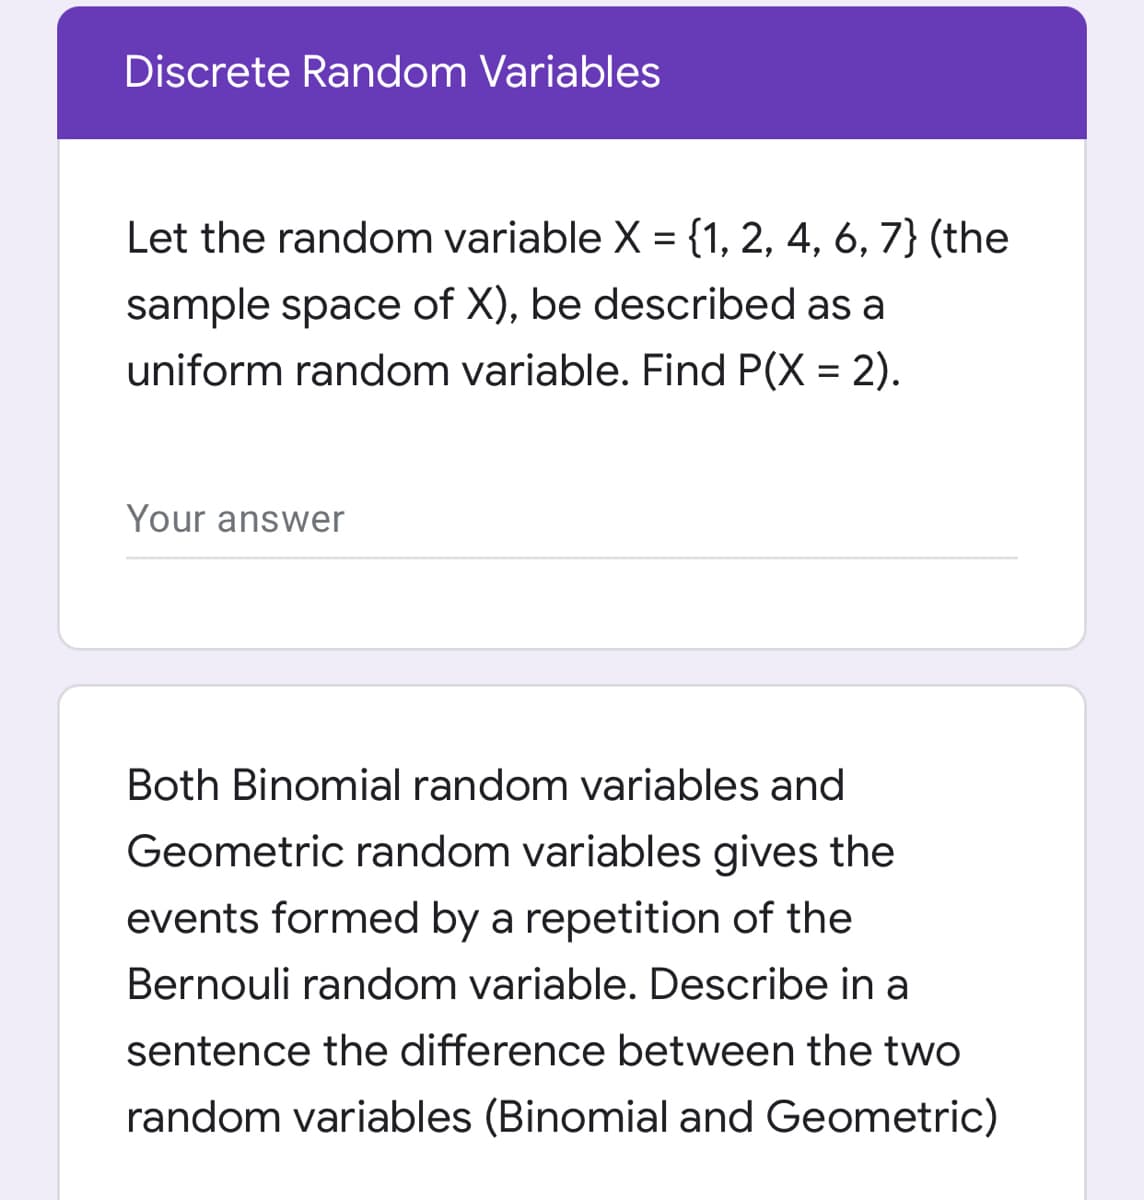 Discrete Random Variables
Let the random variable X = {1, 2, 4, 6, 7} (the
sample space of X), be described as a
6.
uniform random variable. Find P(X = 2).
Your answer
Both Binomial random variables and
Geometric random variables gives the
events formed by a repetition of the
Bernouli random variable. Describe in a
sentence the difference between the two
random variables (Binomial and Geometric)
